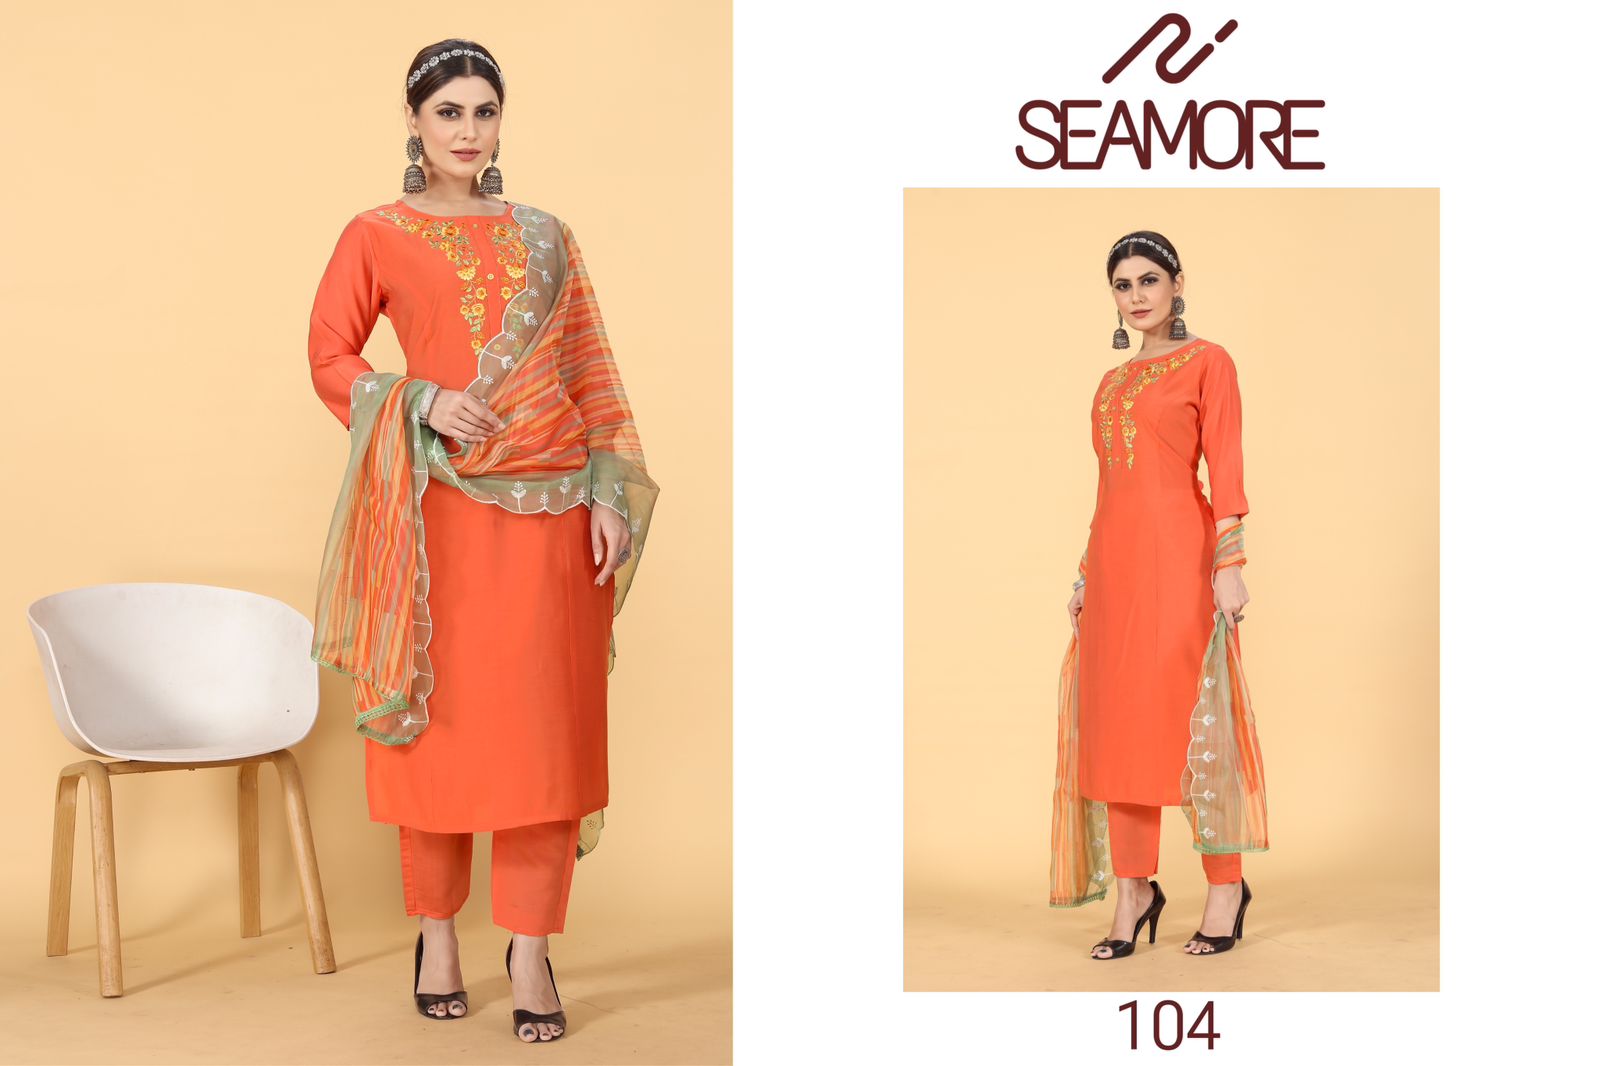 104-105 Seamore Chanderi Readymade Pant Style Suits